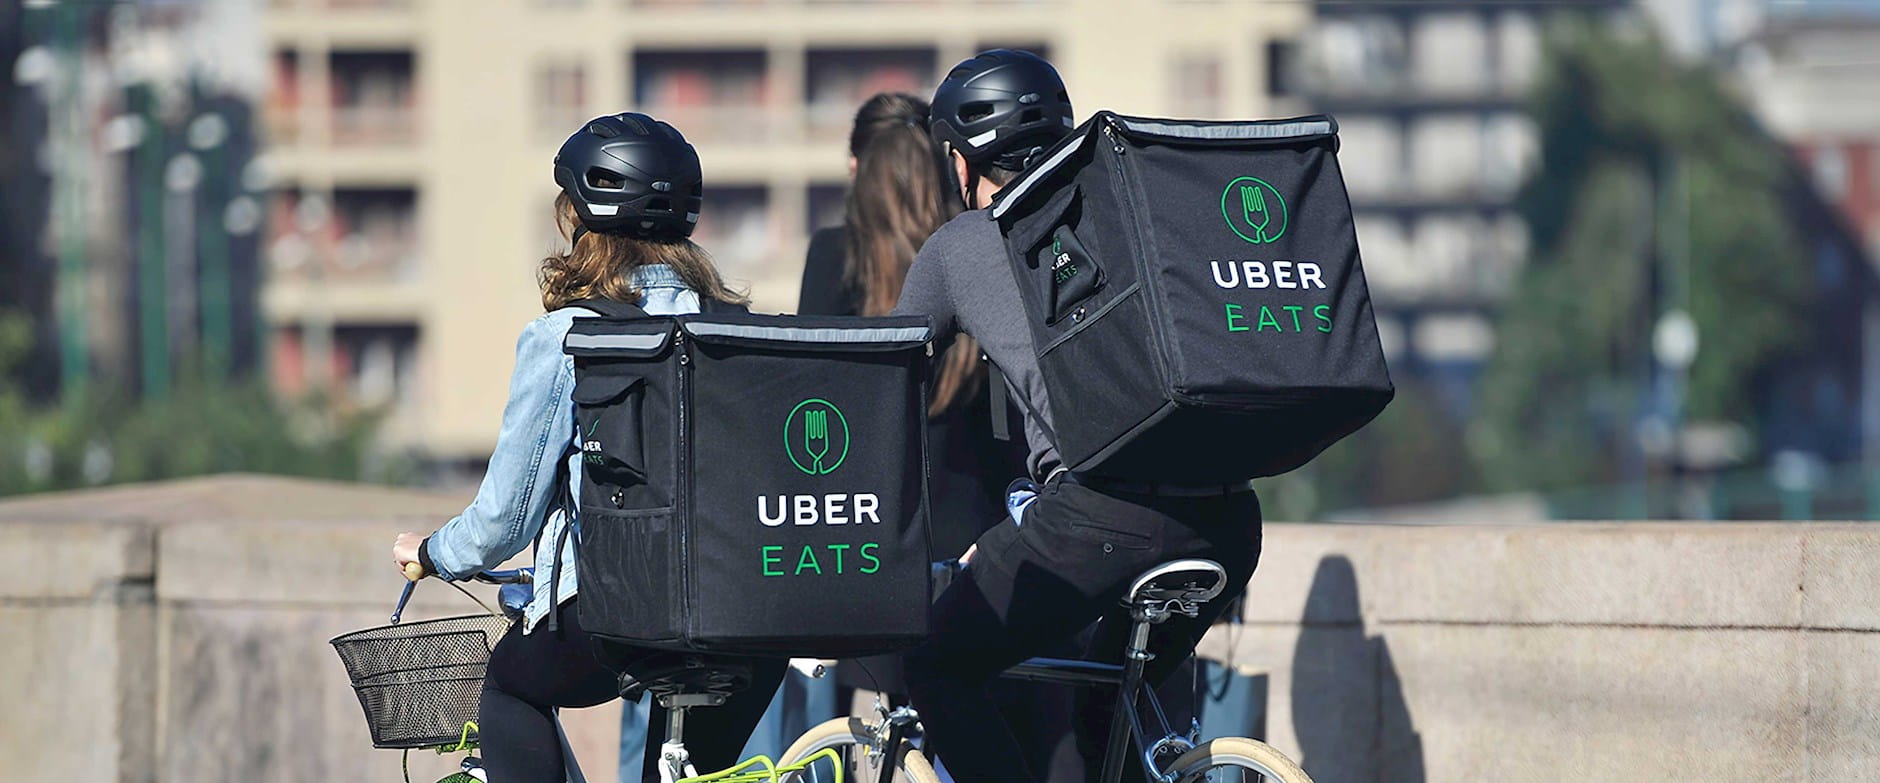 Uber eats delivery people on bikes